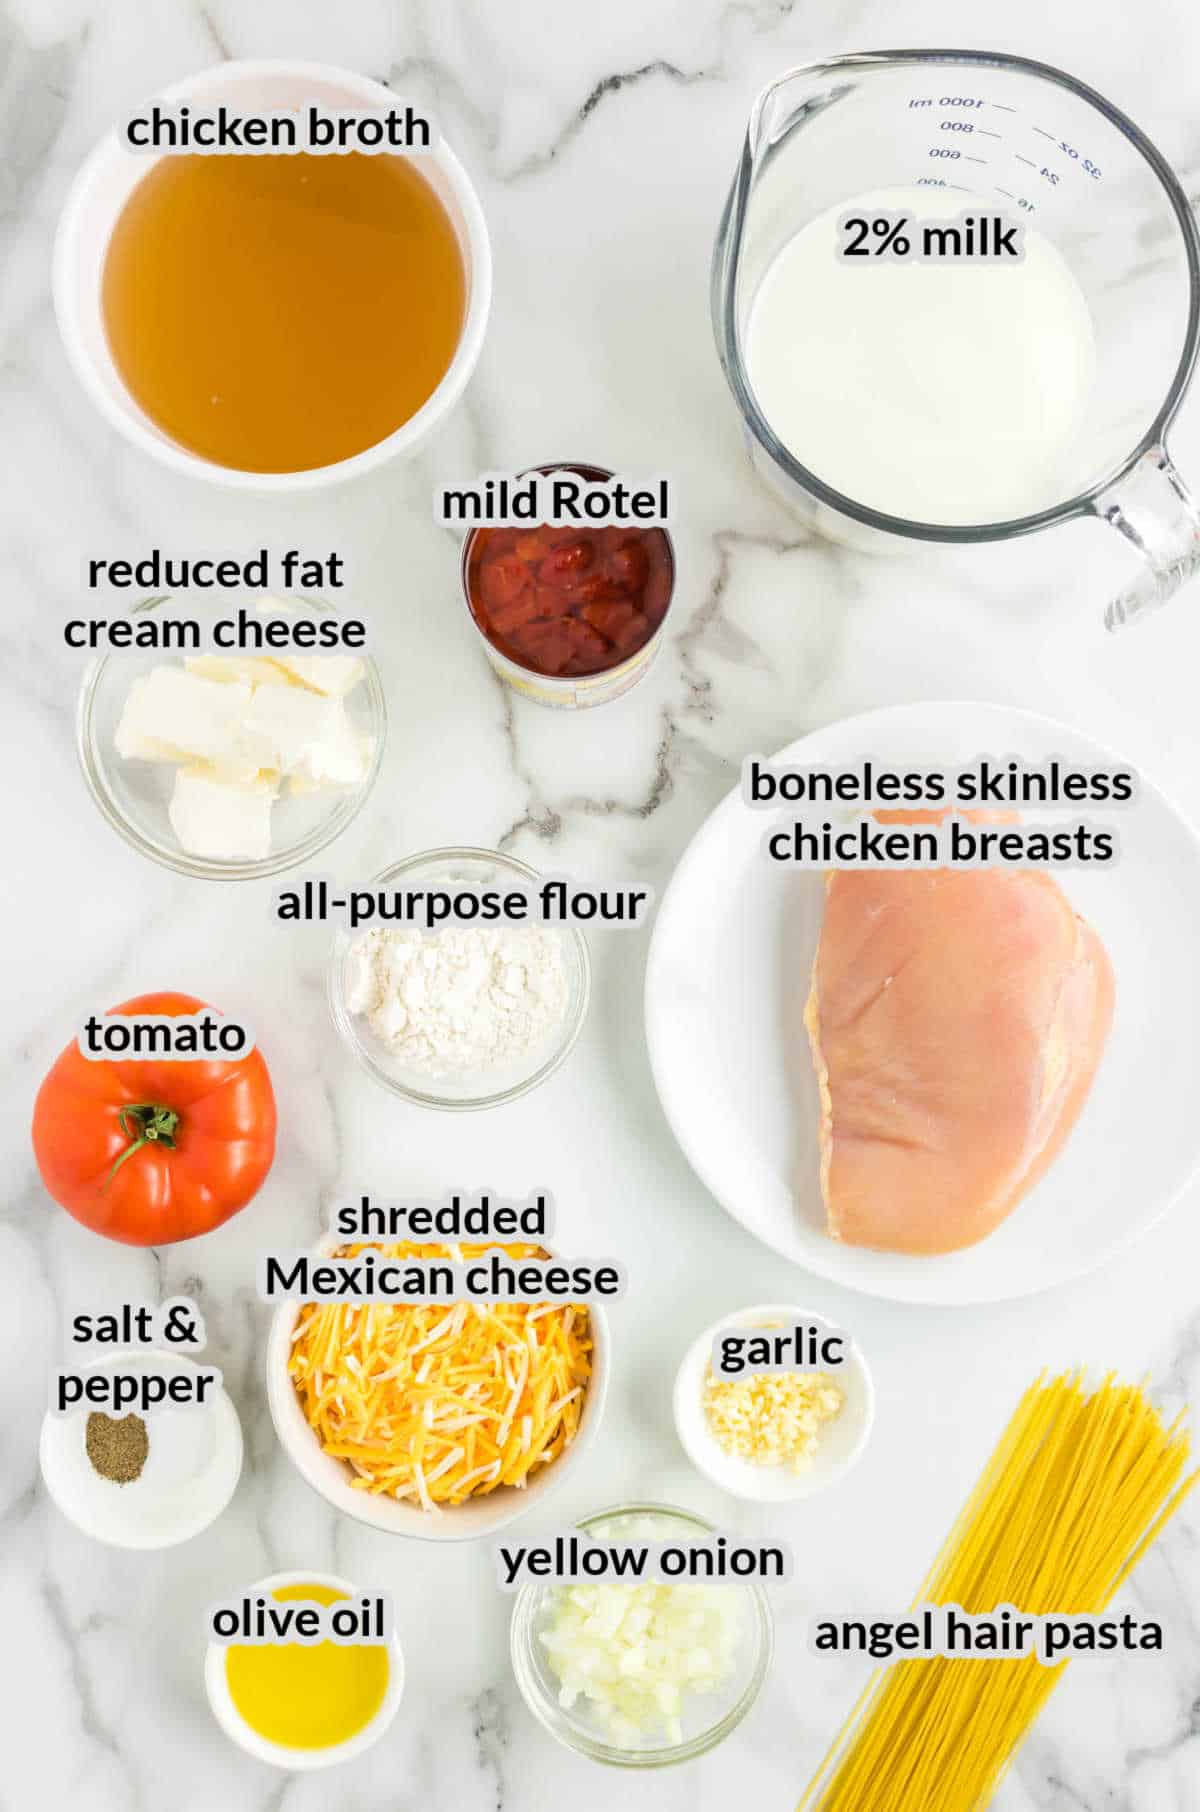 Overhead Image of One Pot Chicken Spaghetti Ingredients